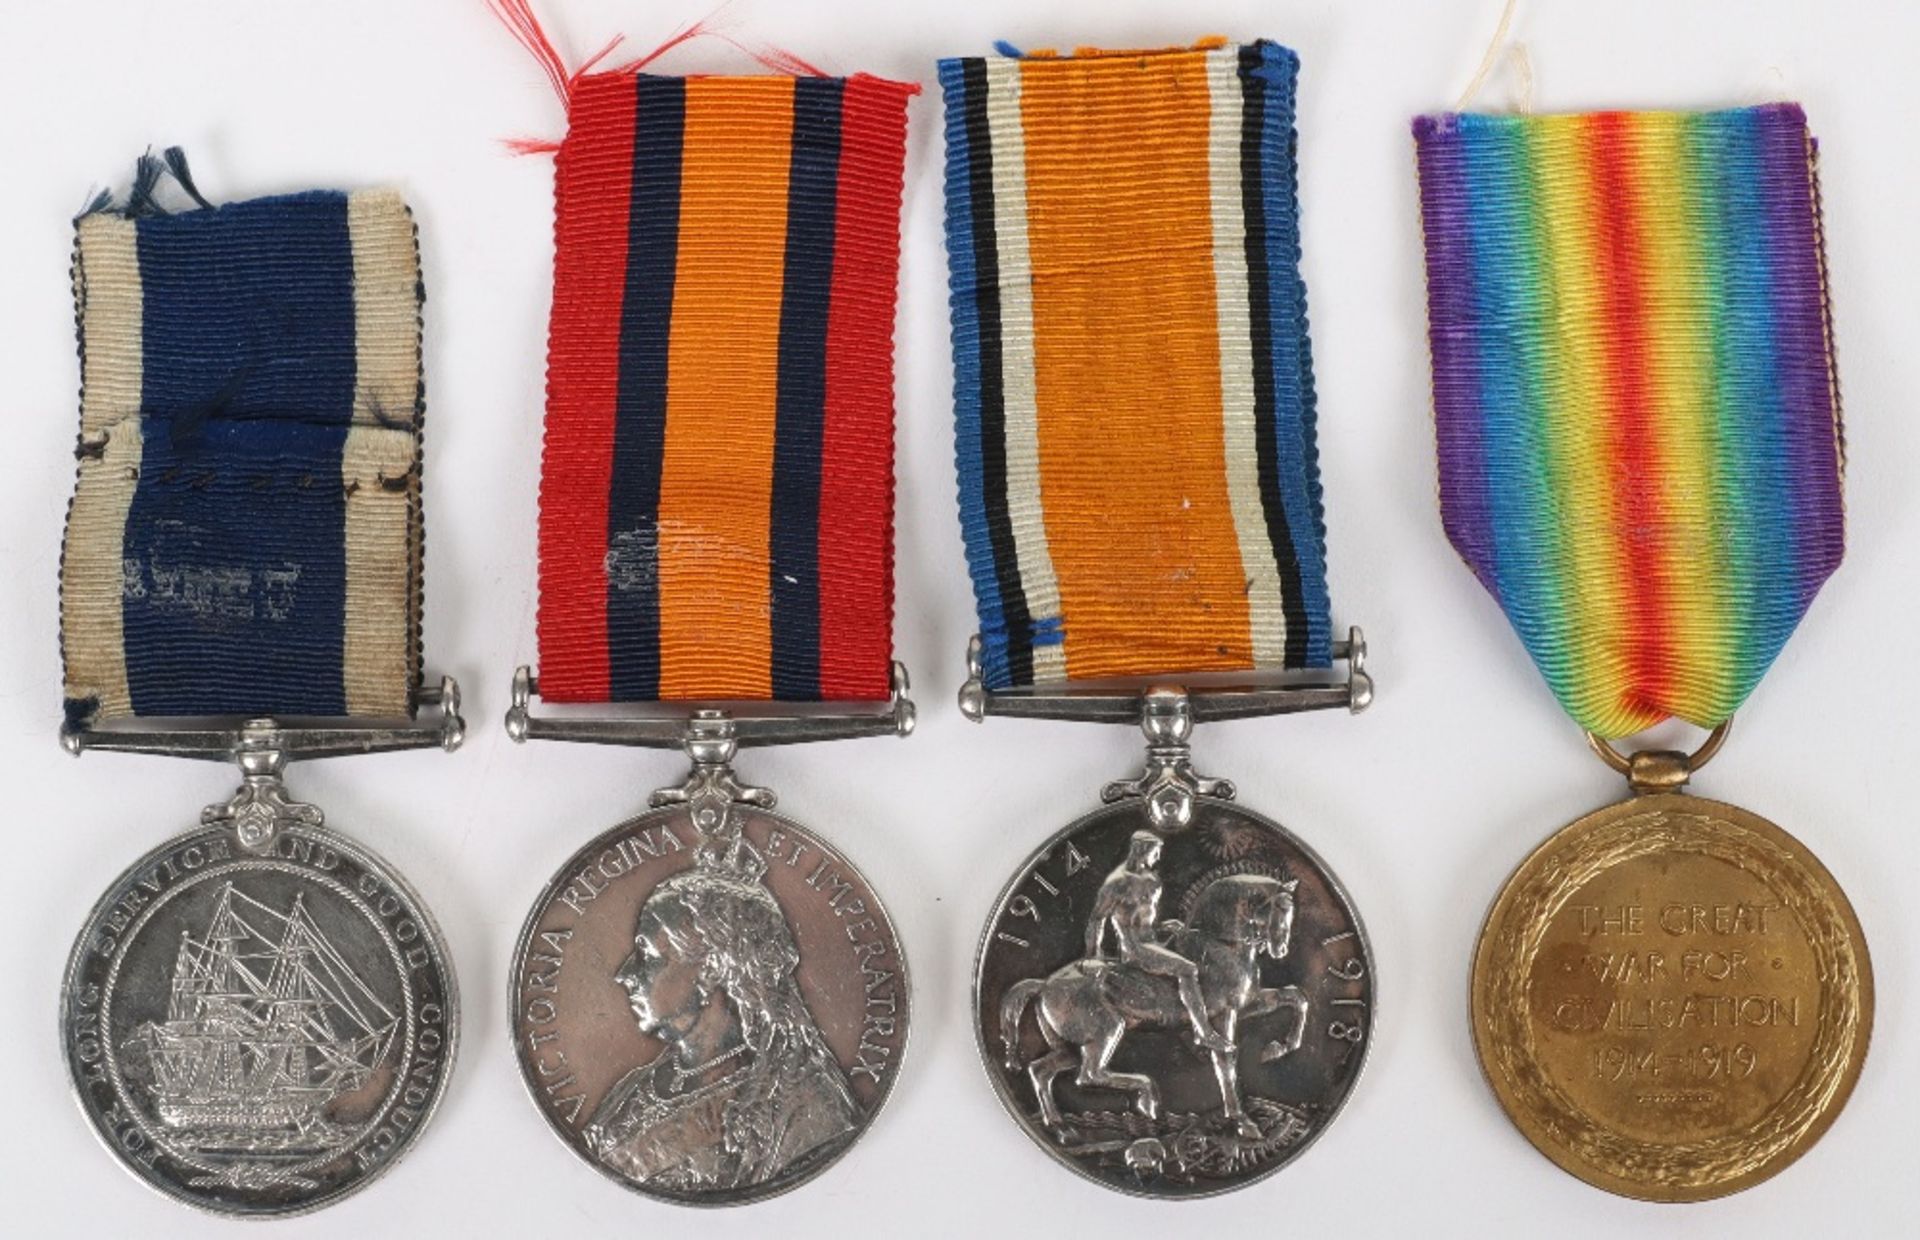 Royal Navy Long Service Medal Group of Four Covering Service from the Boer War to the First World Wa - Image 2 of 3